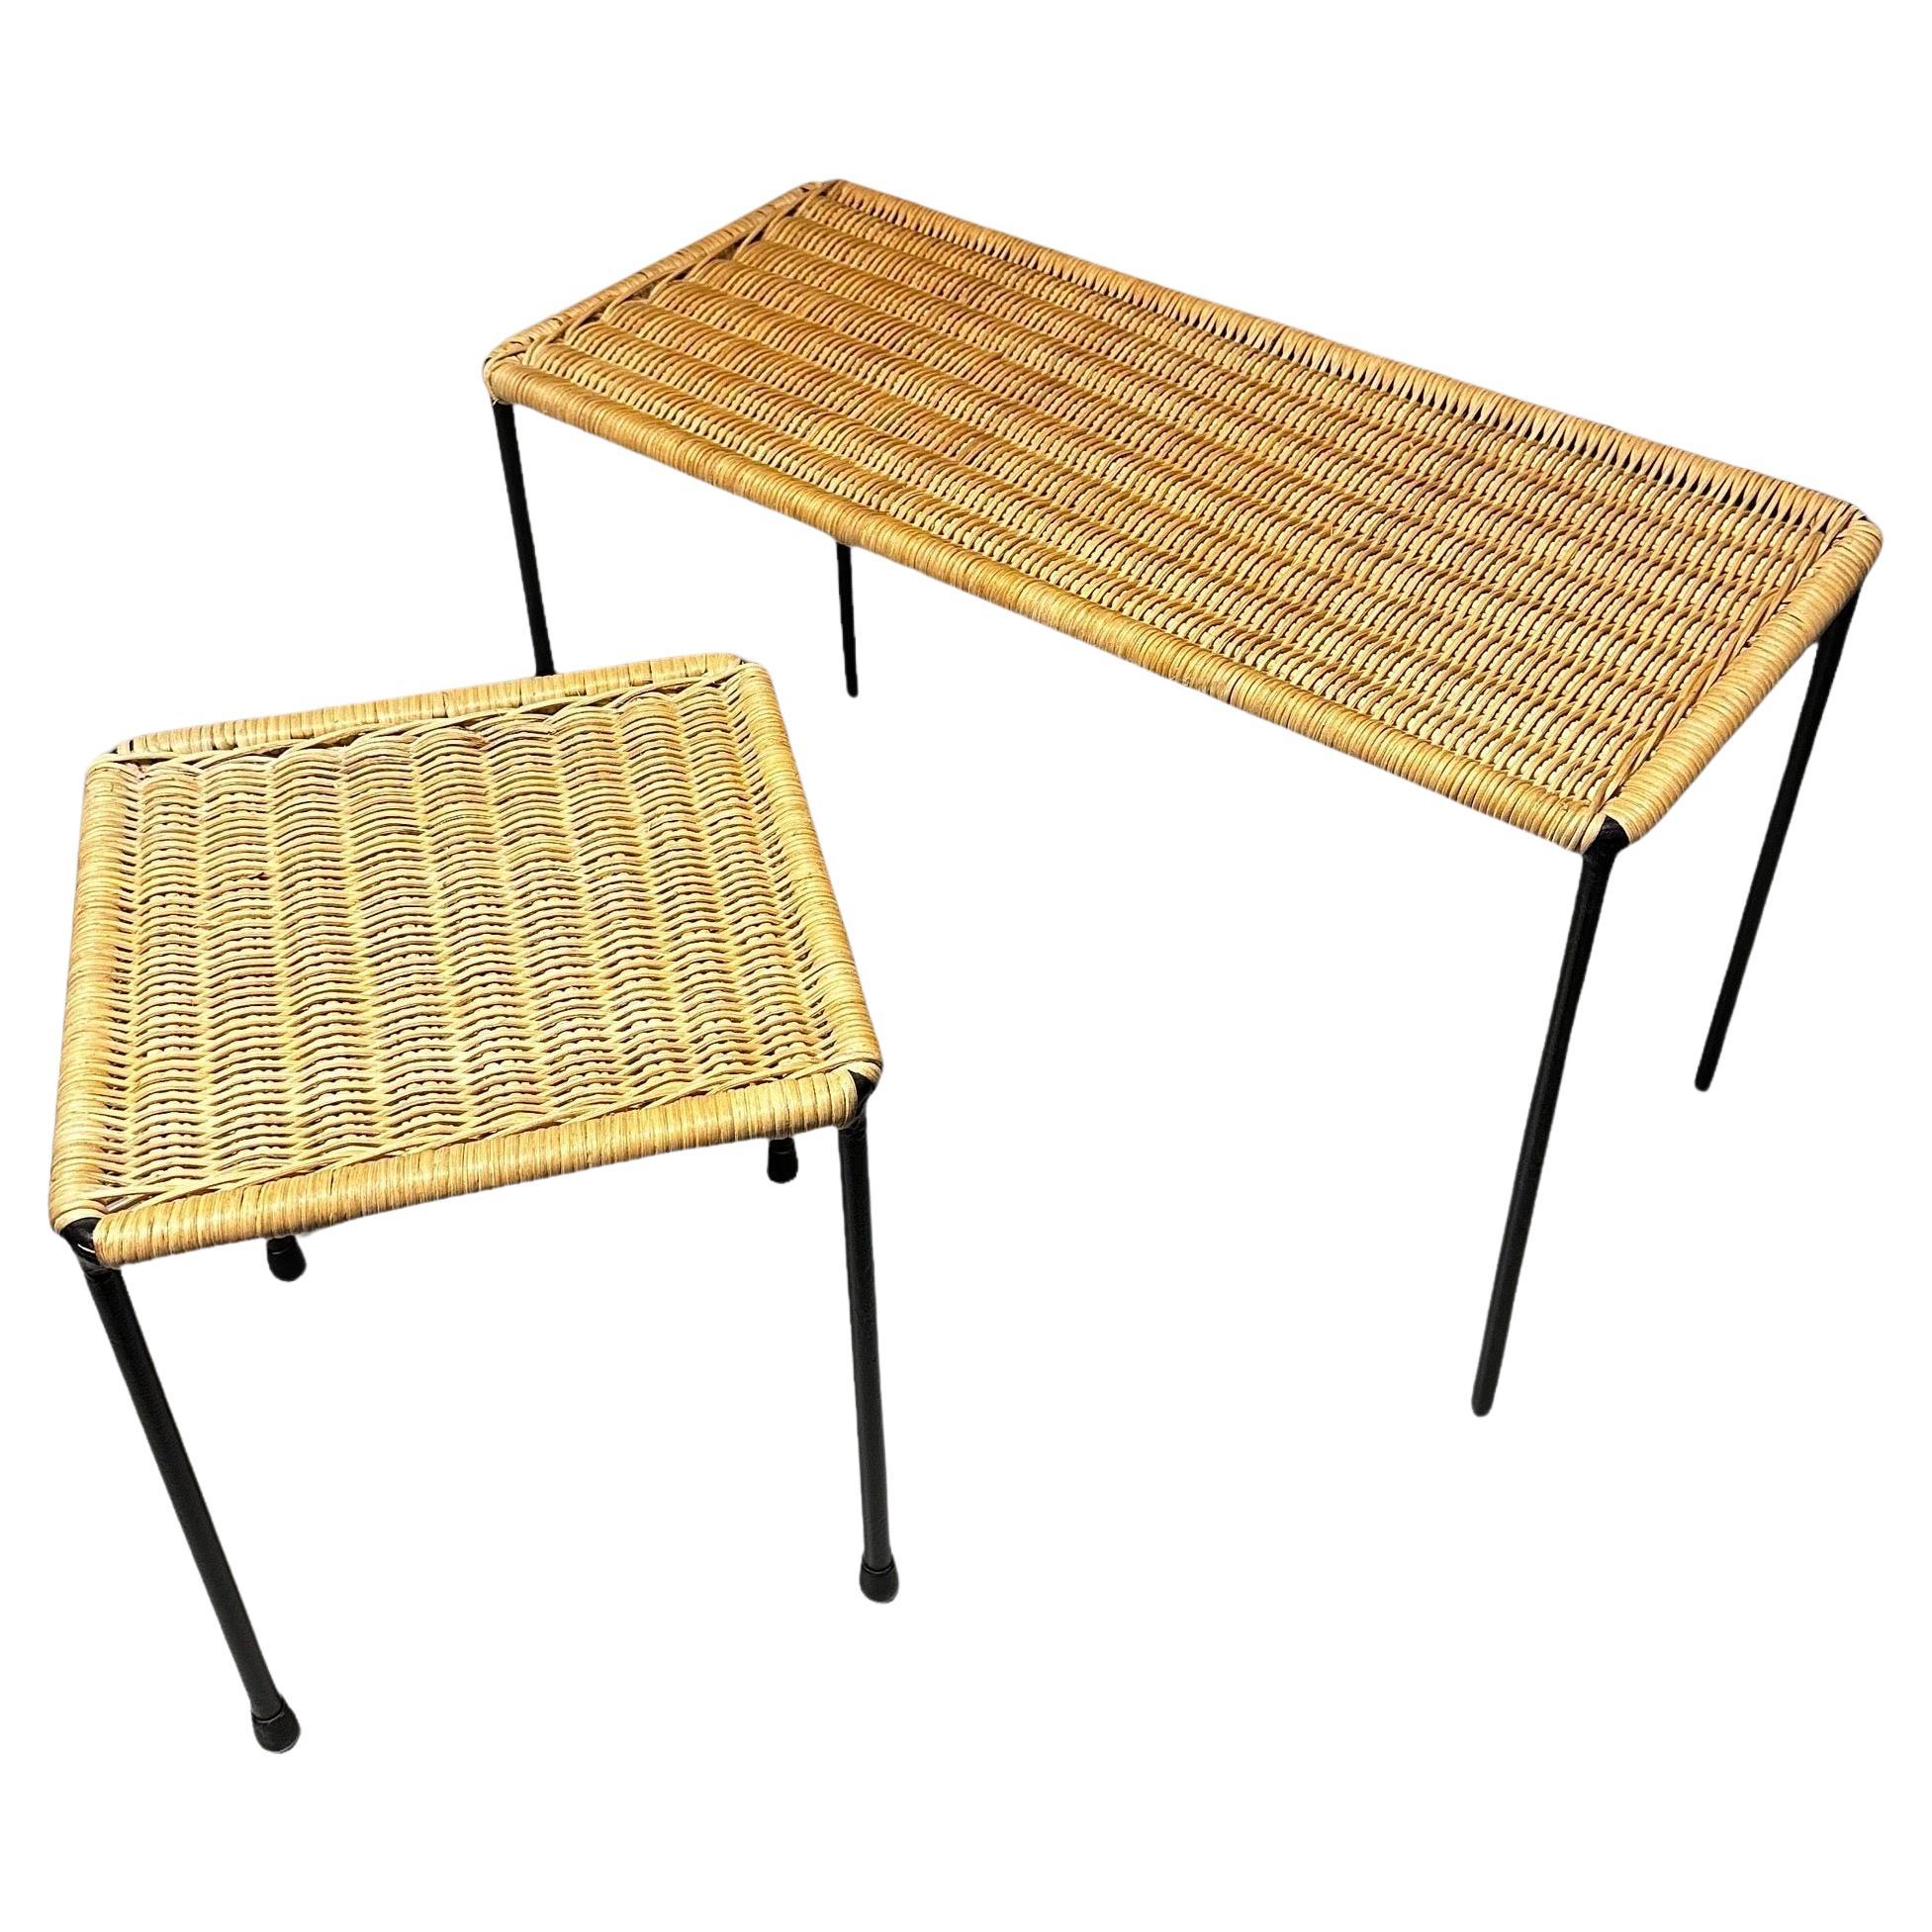 Carl Auböck Side Tables with Black Iron and Rattan, Set of Two, Austria 1950s For Sale